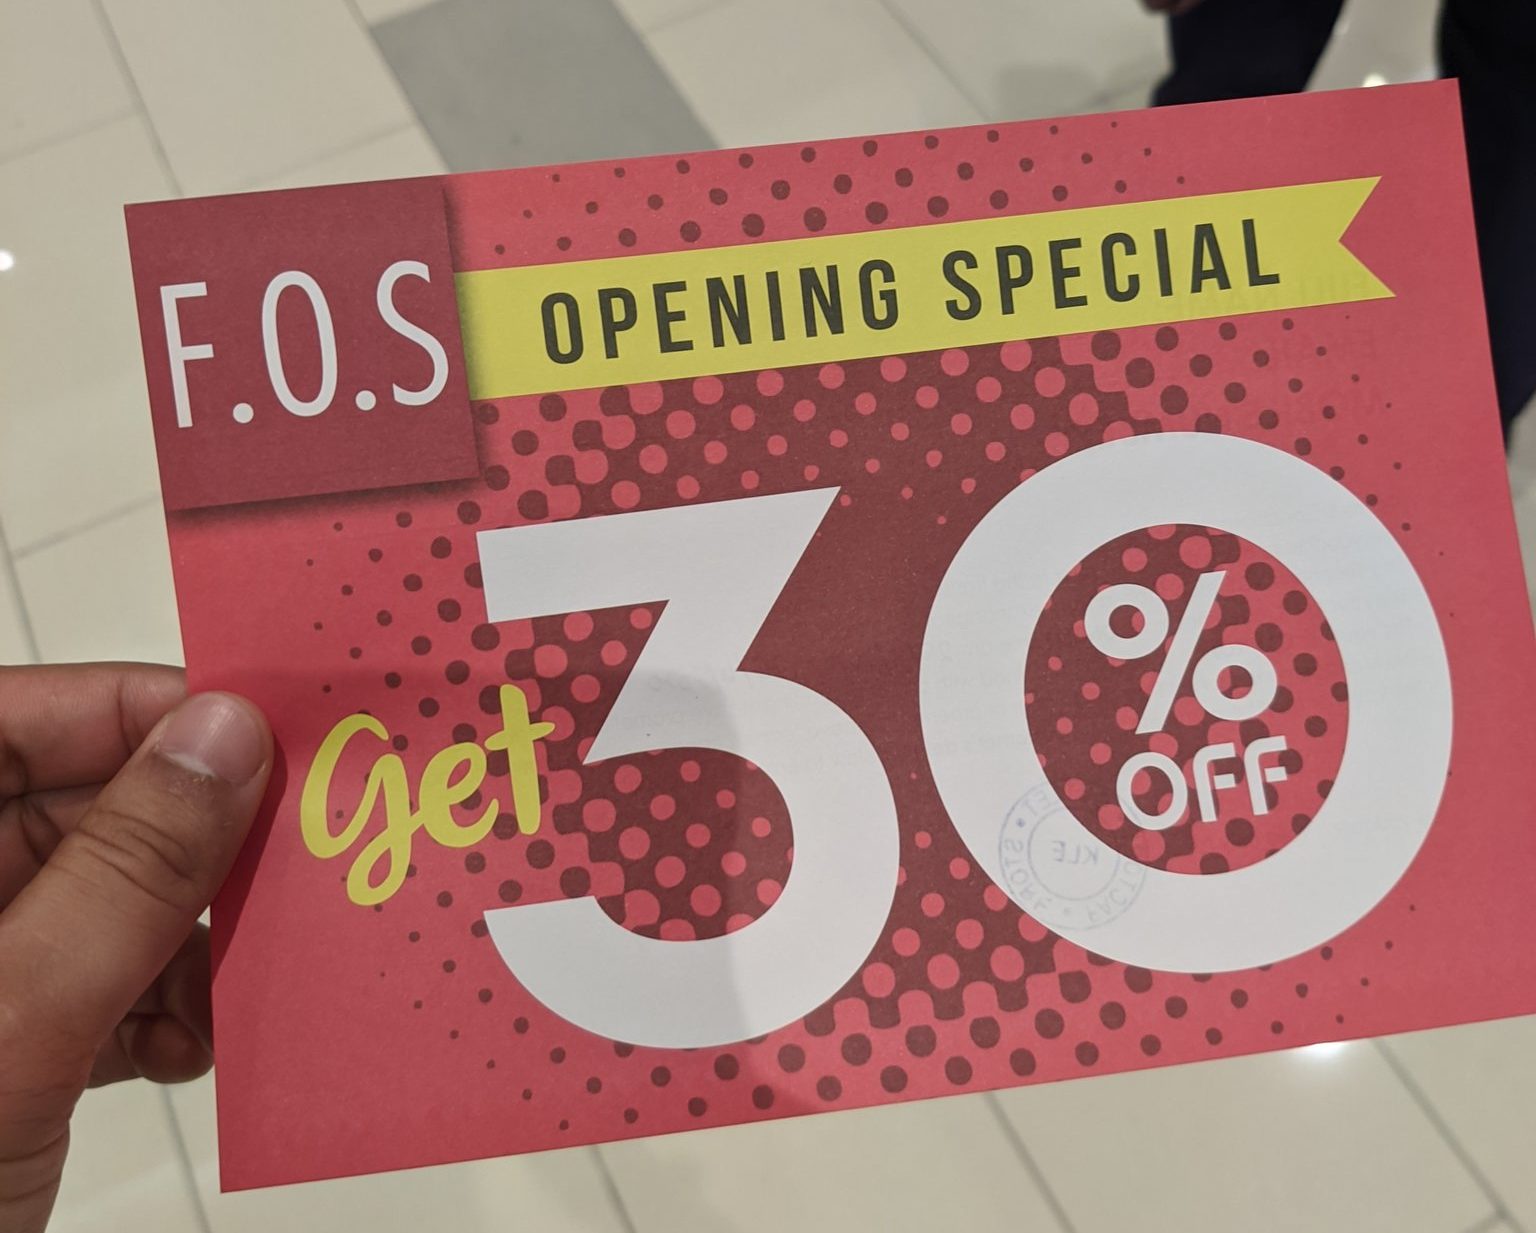 KL East Mall - FOS opening promo